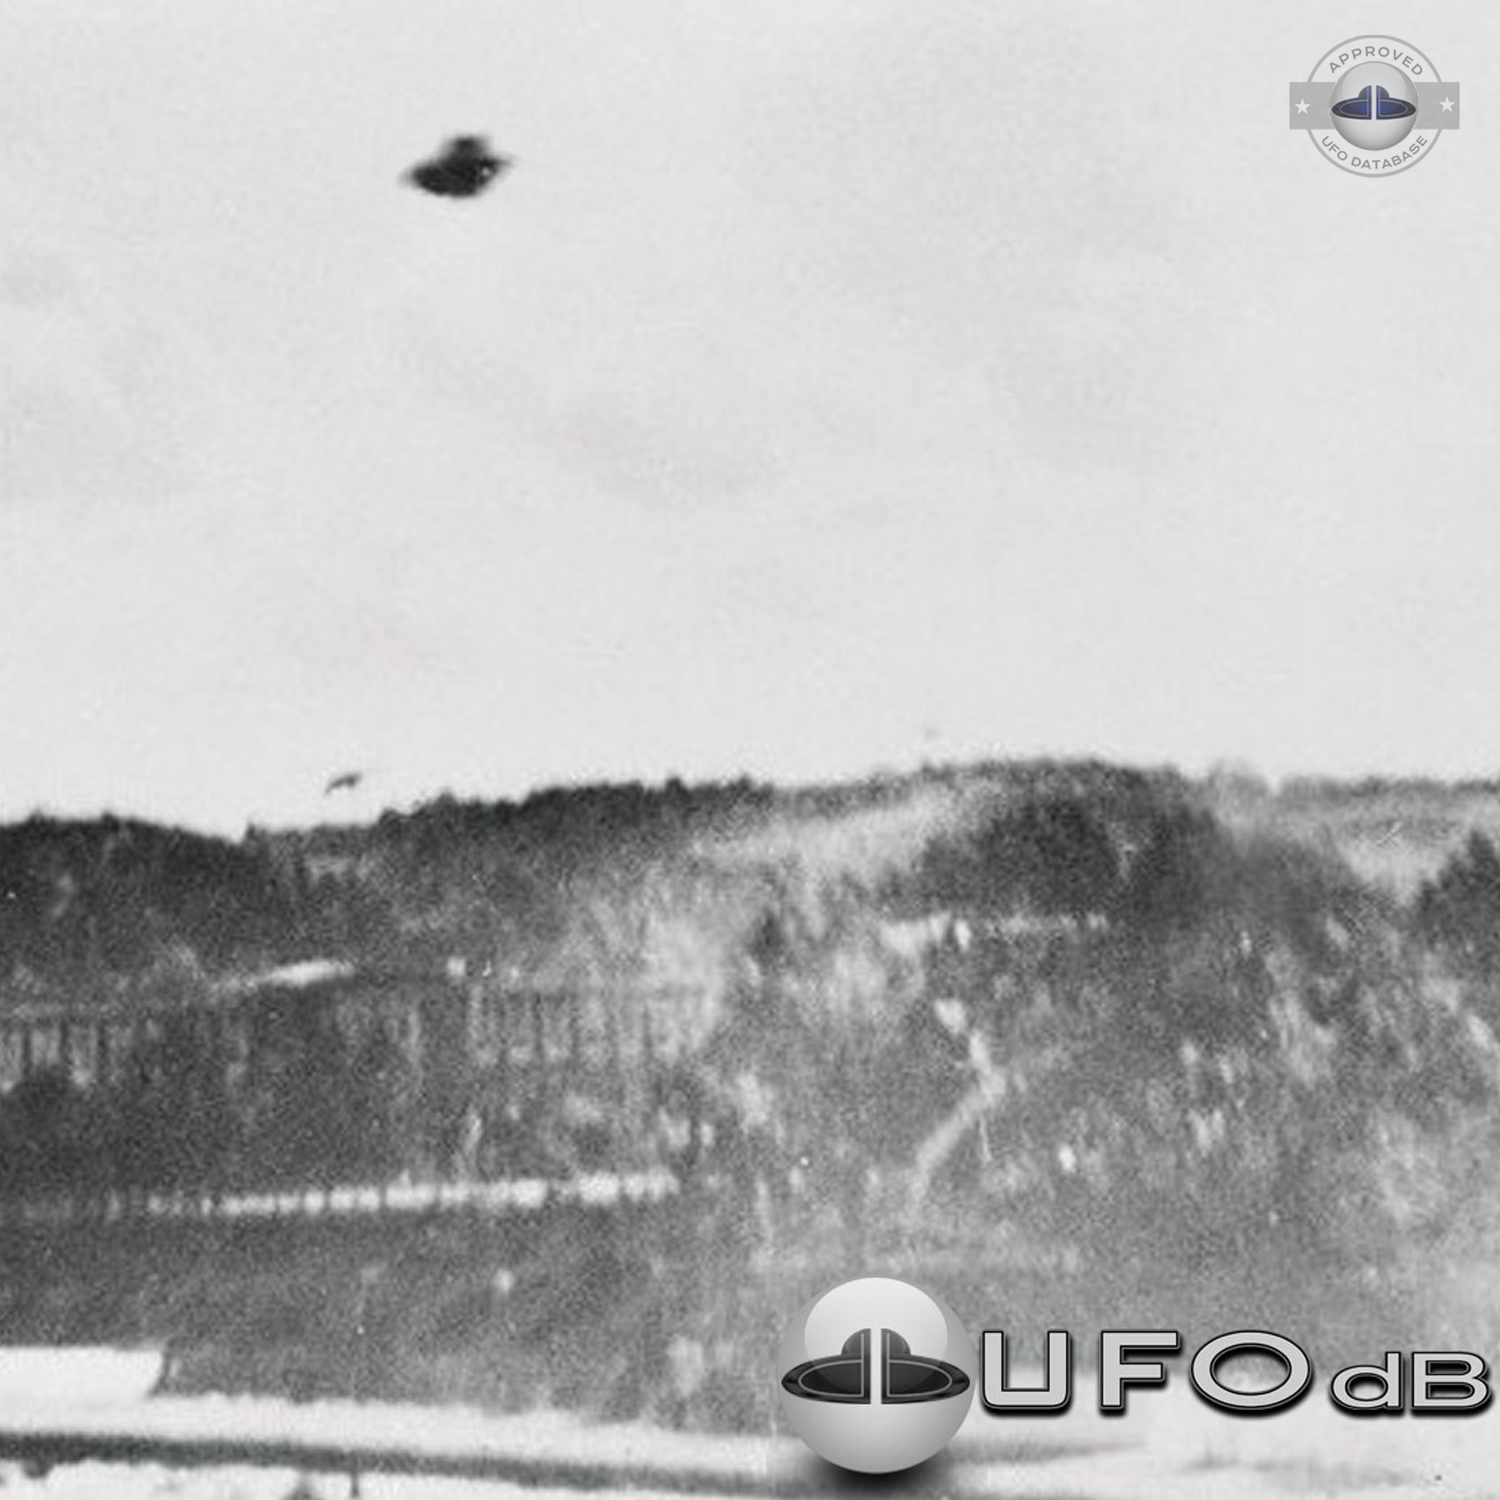 Old grey UFO picture showing an UFO passing over Rome